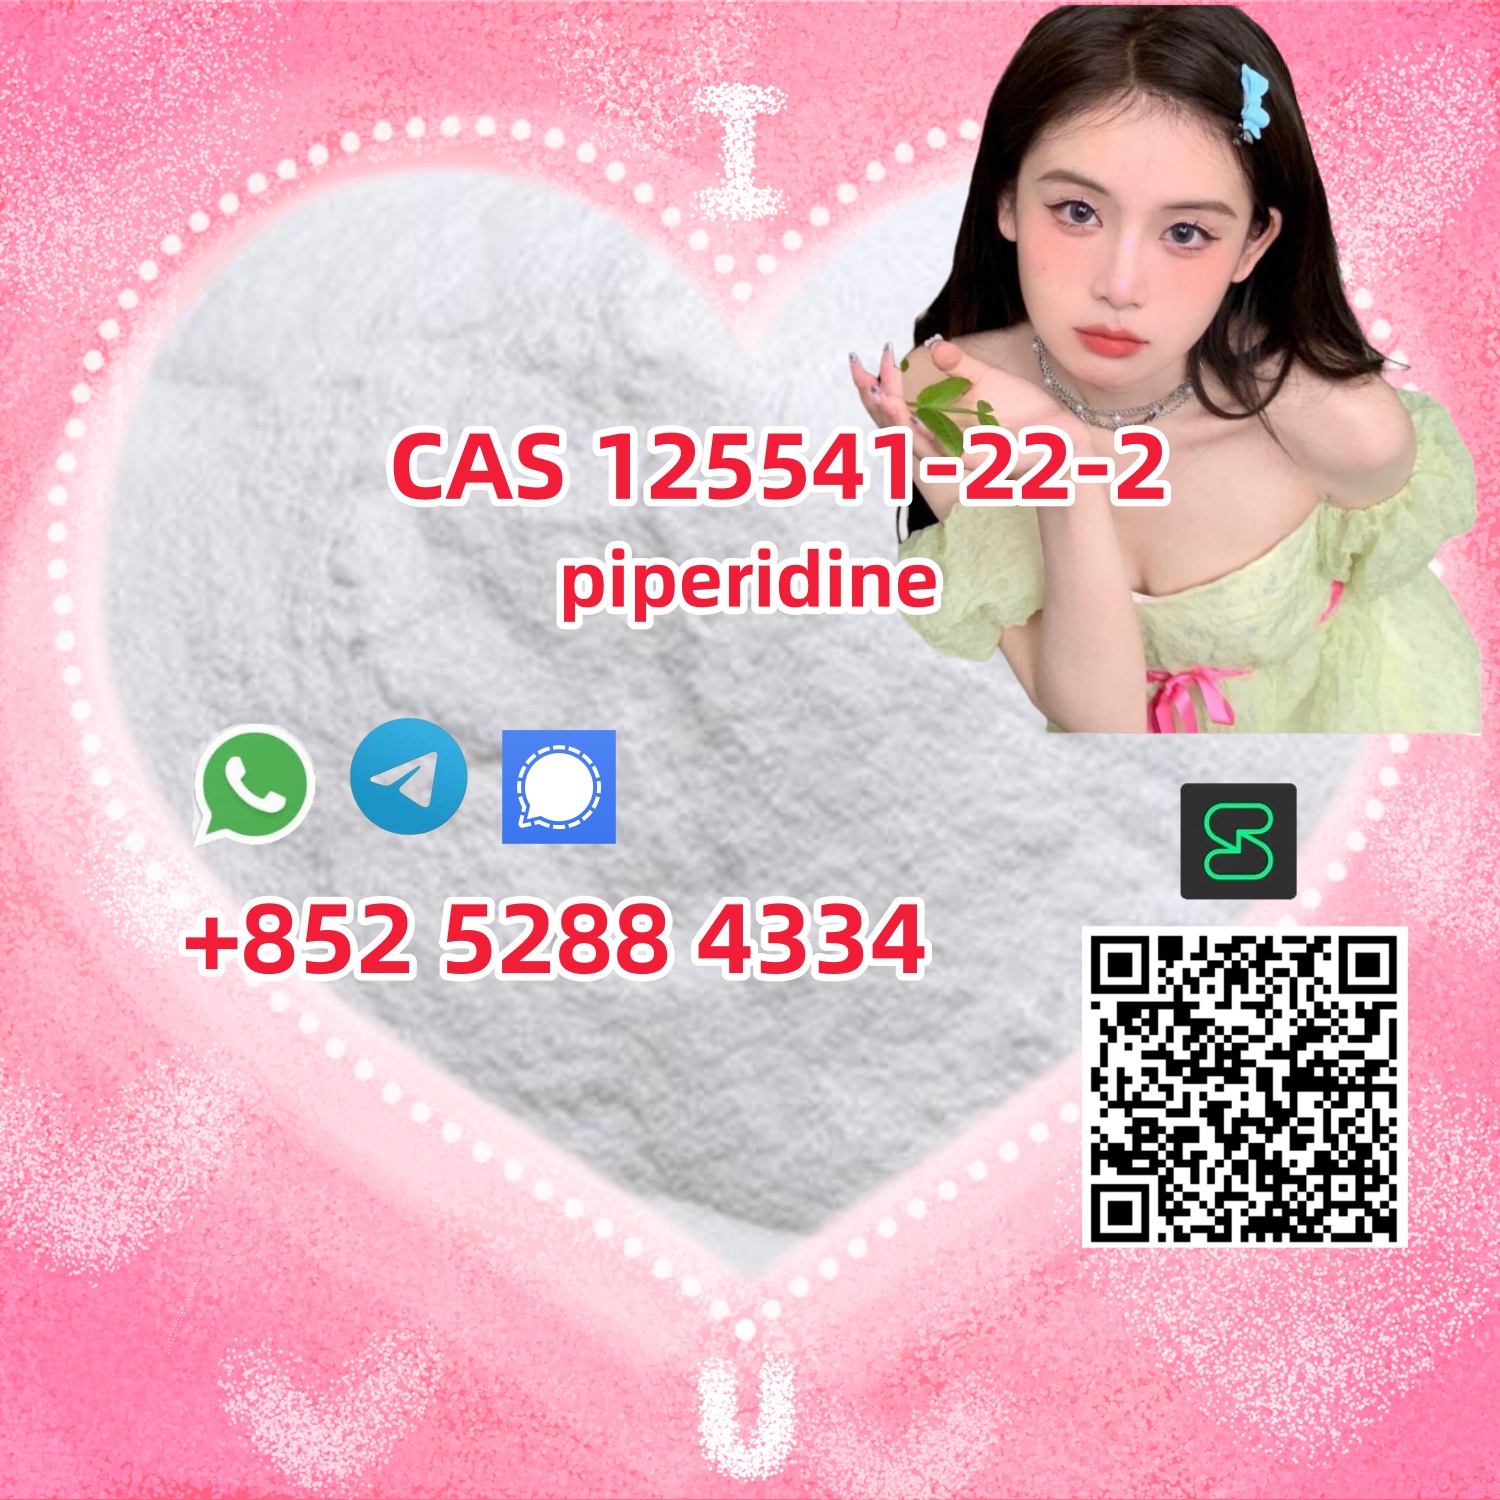 Order piperidine white crystalline powder CAS 125541-22-2,aaaaa,Others,Services,77traders